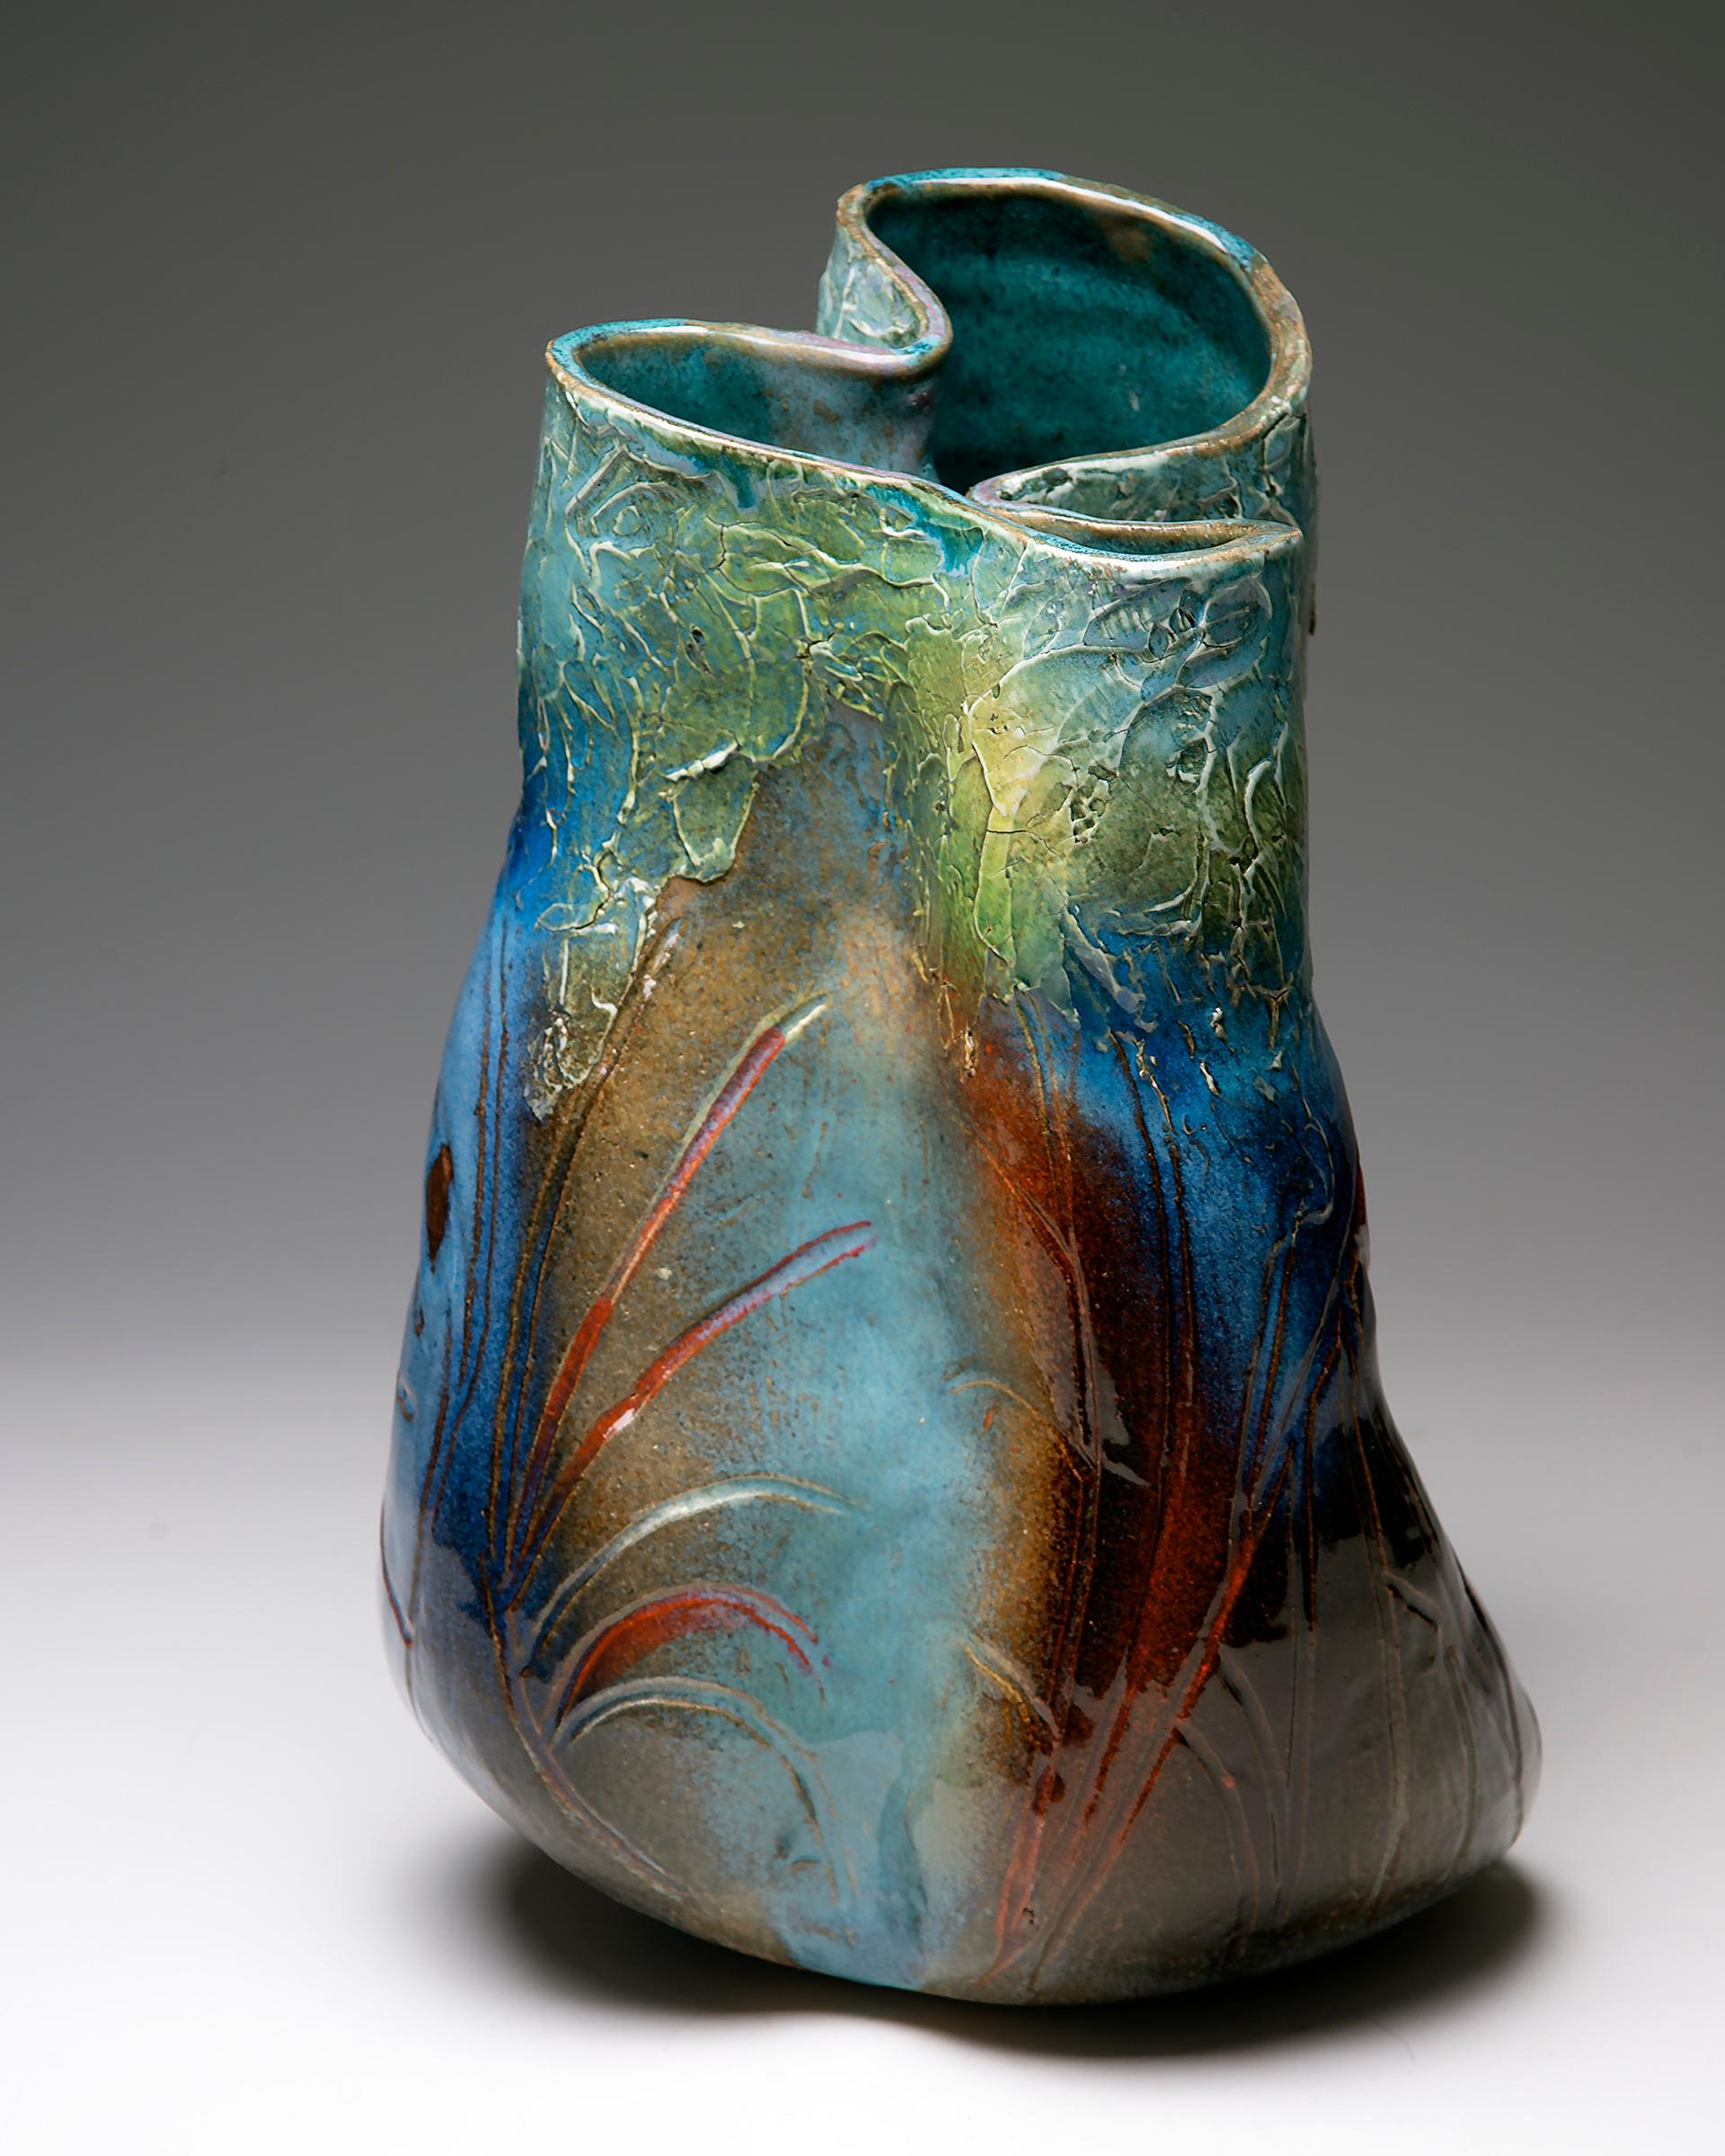 Flat coil built vessel. Organic form, allowing clay to follow its natural form
from the bottom up. Textured porcelain slip, finished with underglazes and
multiple sprayed glazes.

About the Artist Marc Cohen
I love the raw and earthy properties of